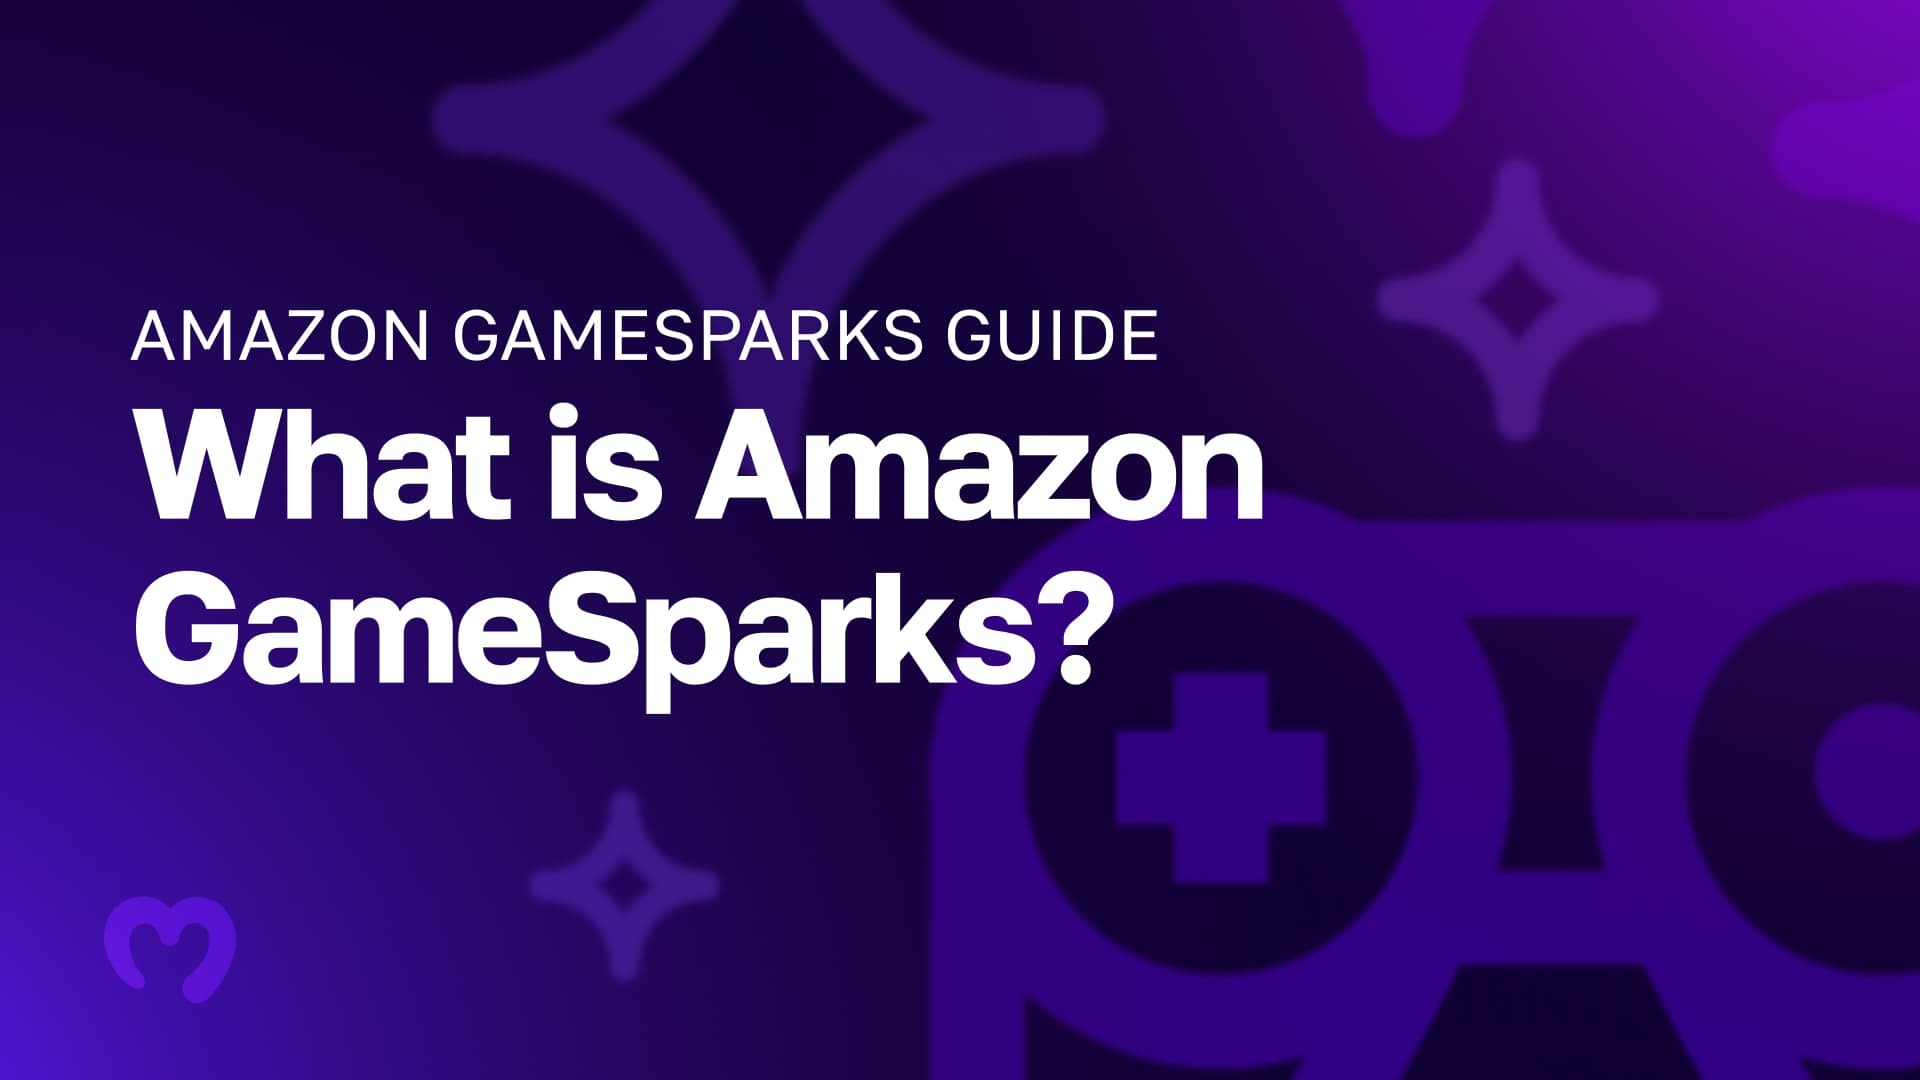 Amazon GameSparks Guide - What is Amazon GameSparks?